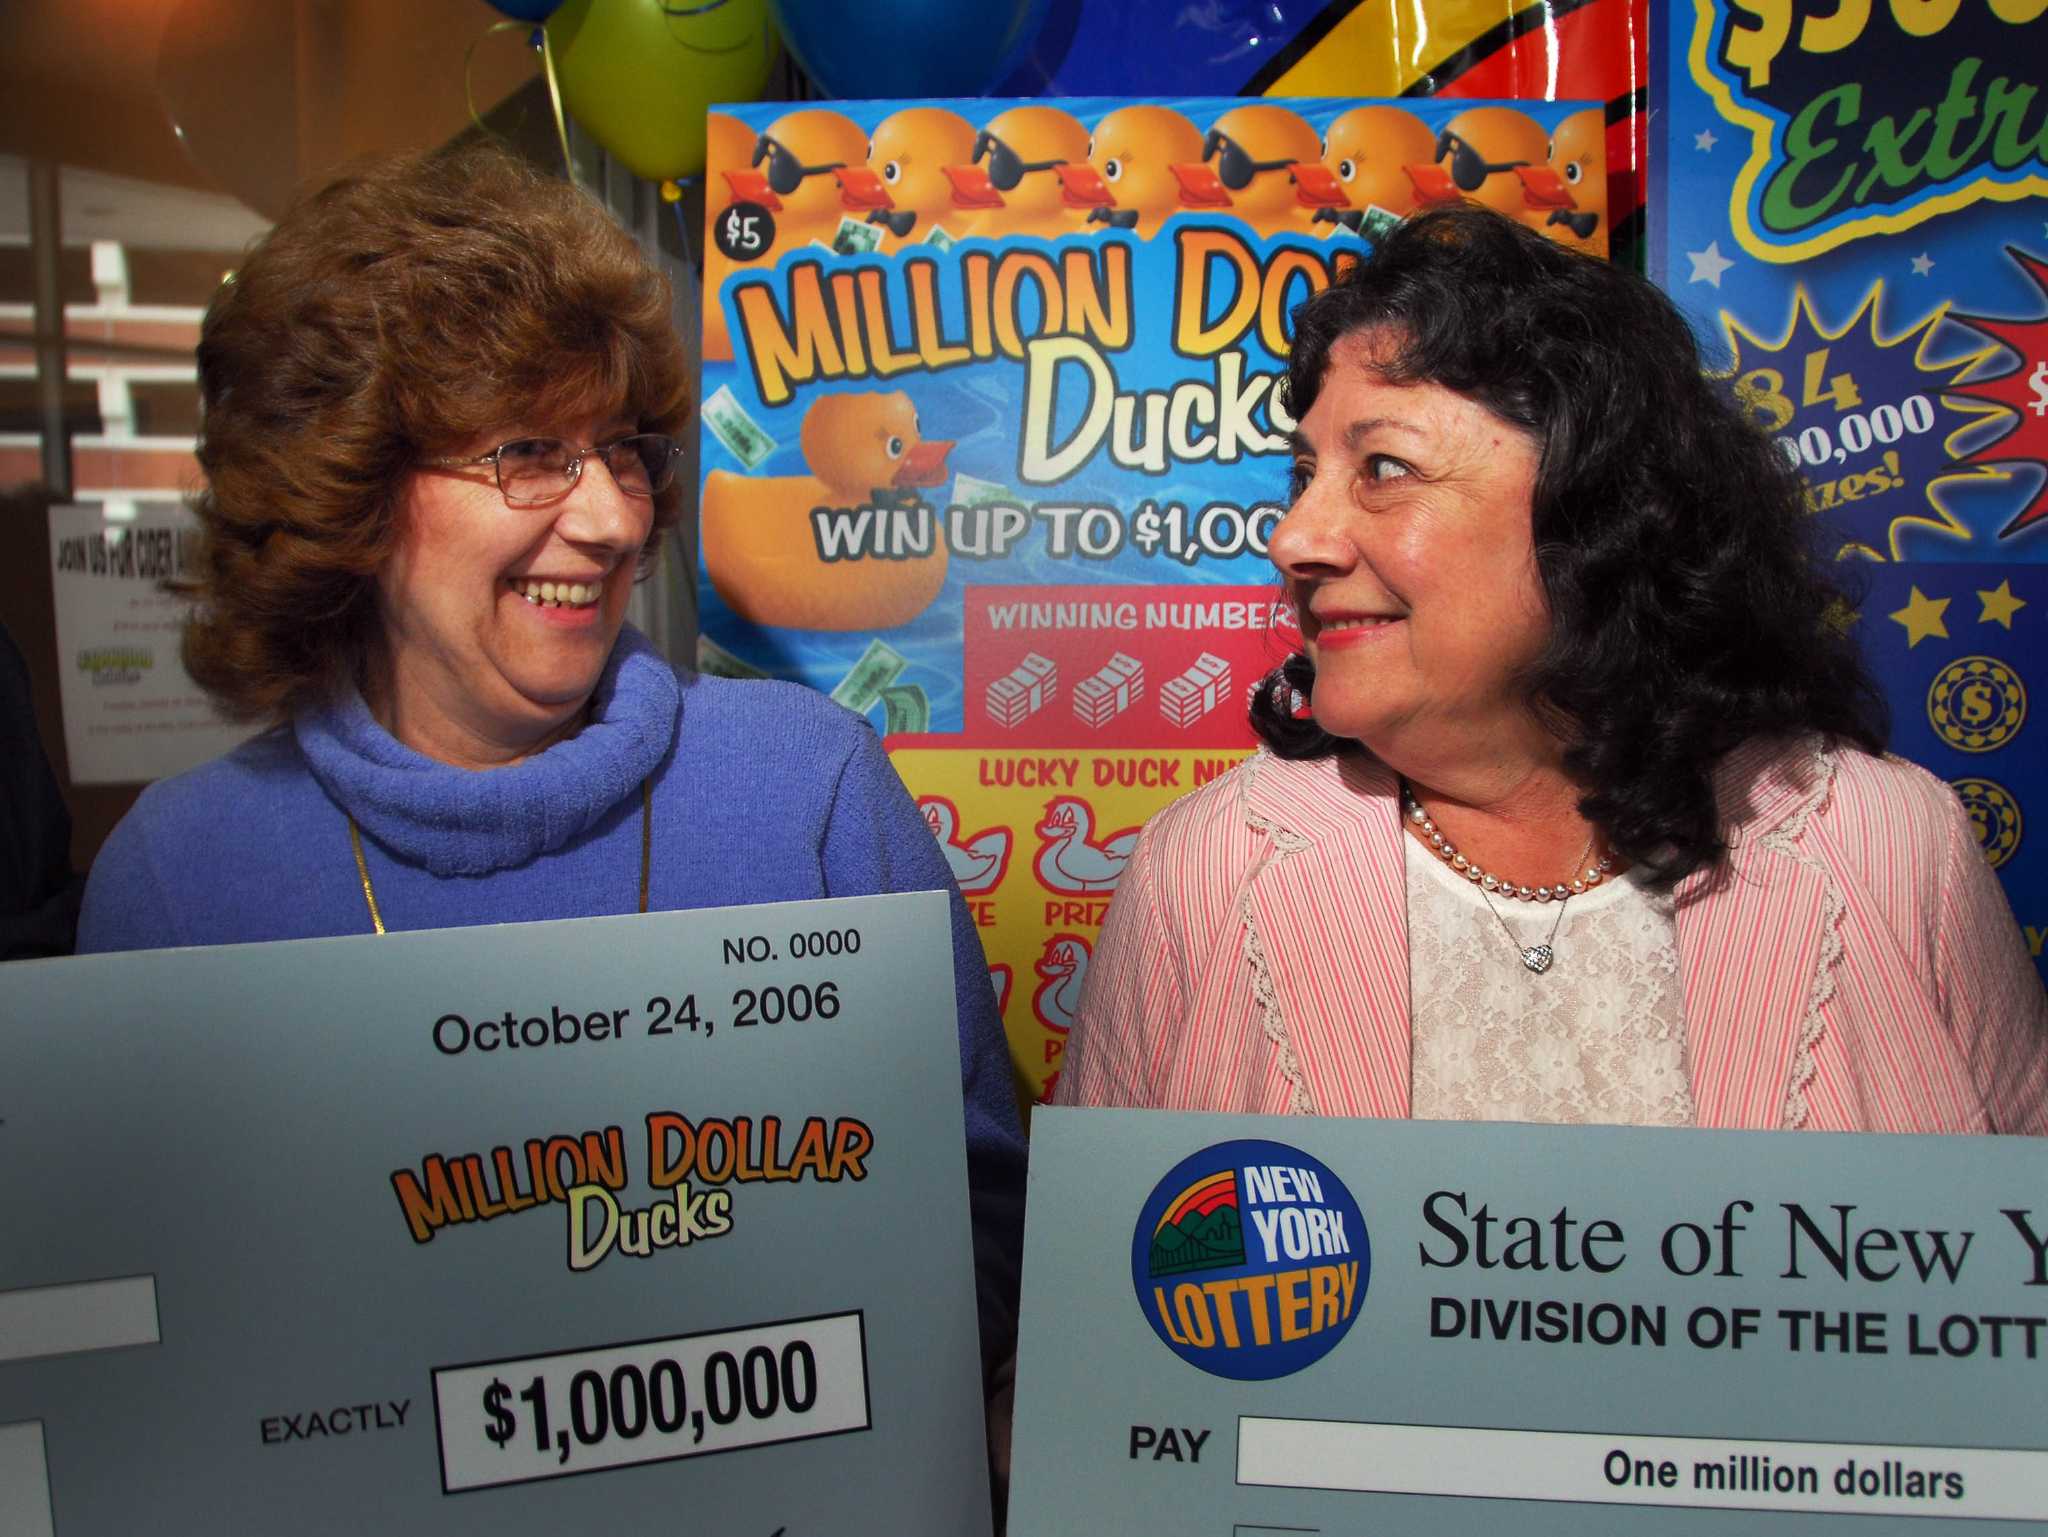 NY Lottery: These scratch-off games have $1M, $5M and $10M winning